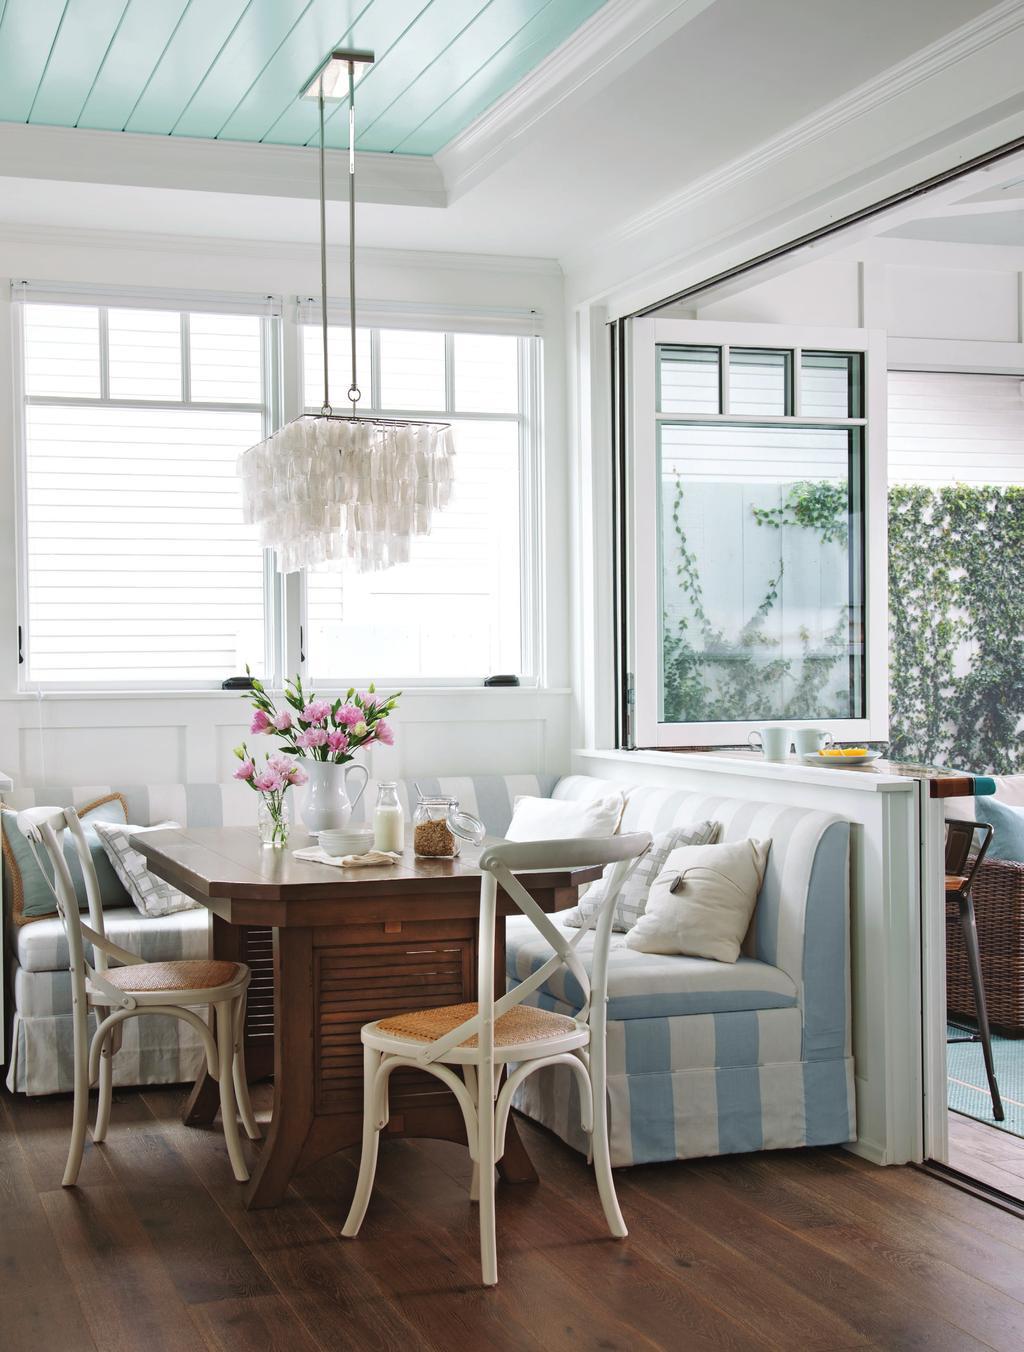 THIS PHOTO: A custom-made dining table tucks perfectly into the small banquette area.